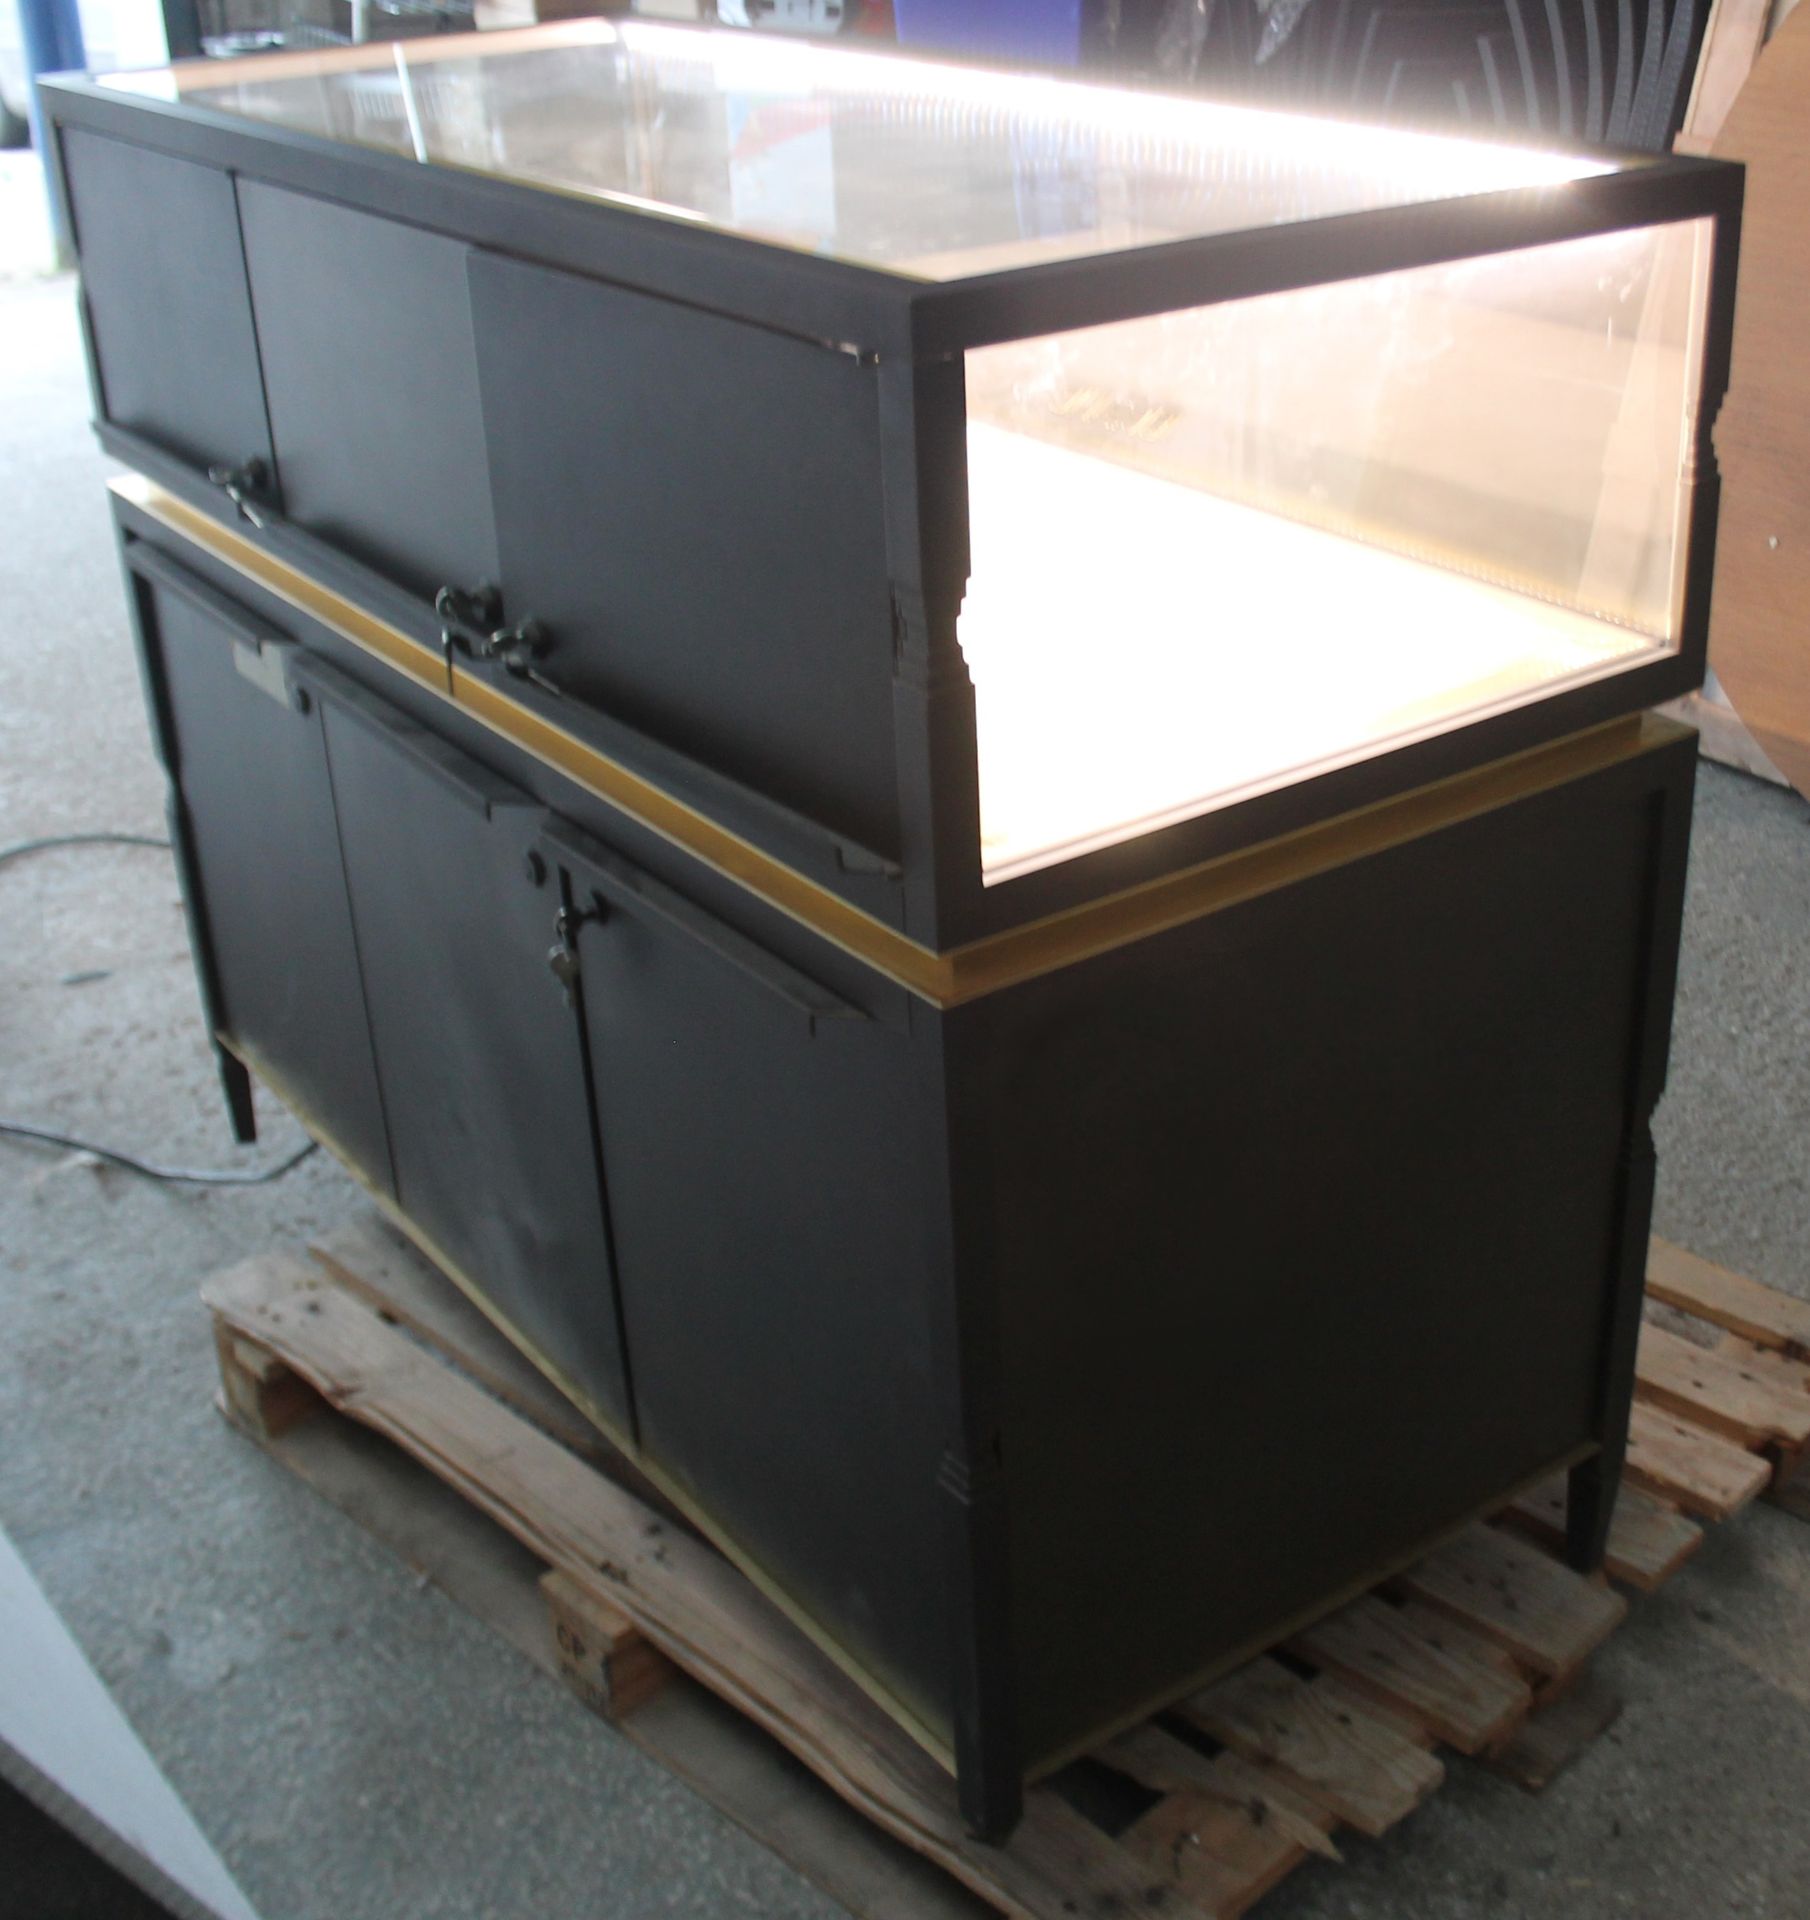 1 x Commercial 3-Door Retail Counter / Illuminated Display Case With A Gun Metal Finish - Ex-Display - Image 13 of 18